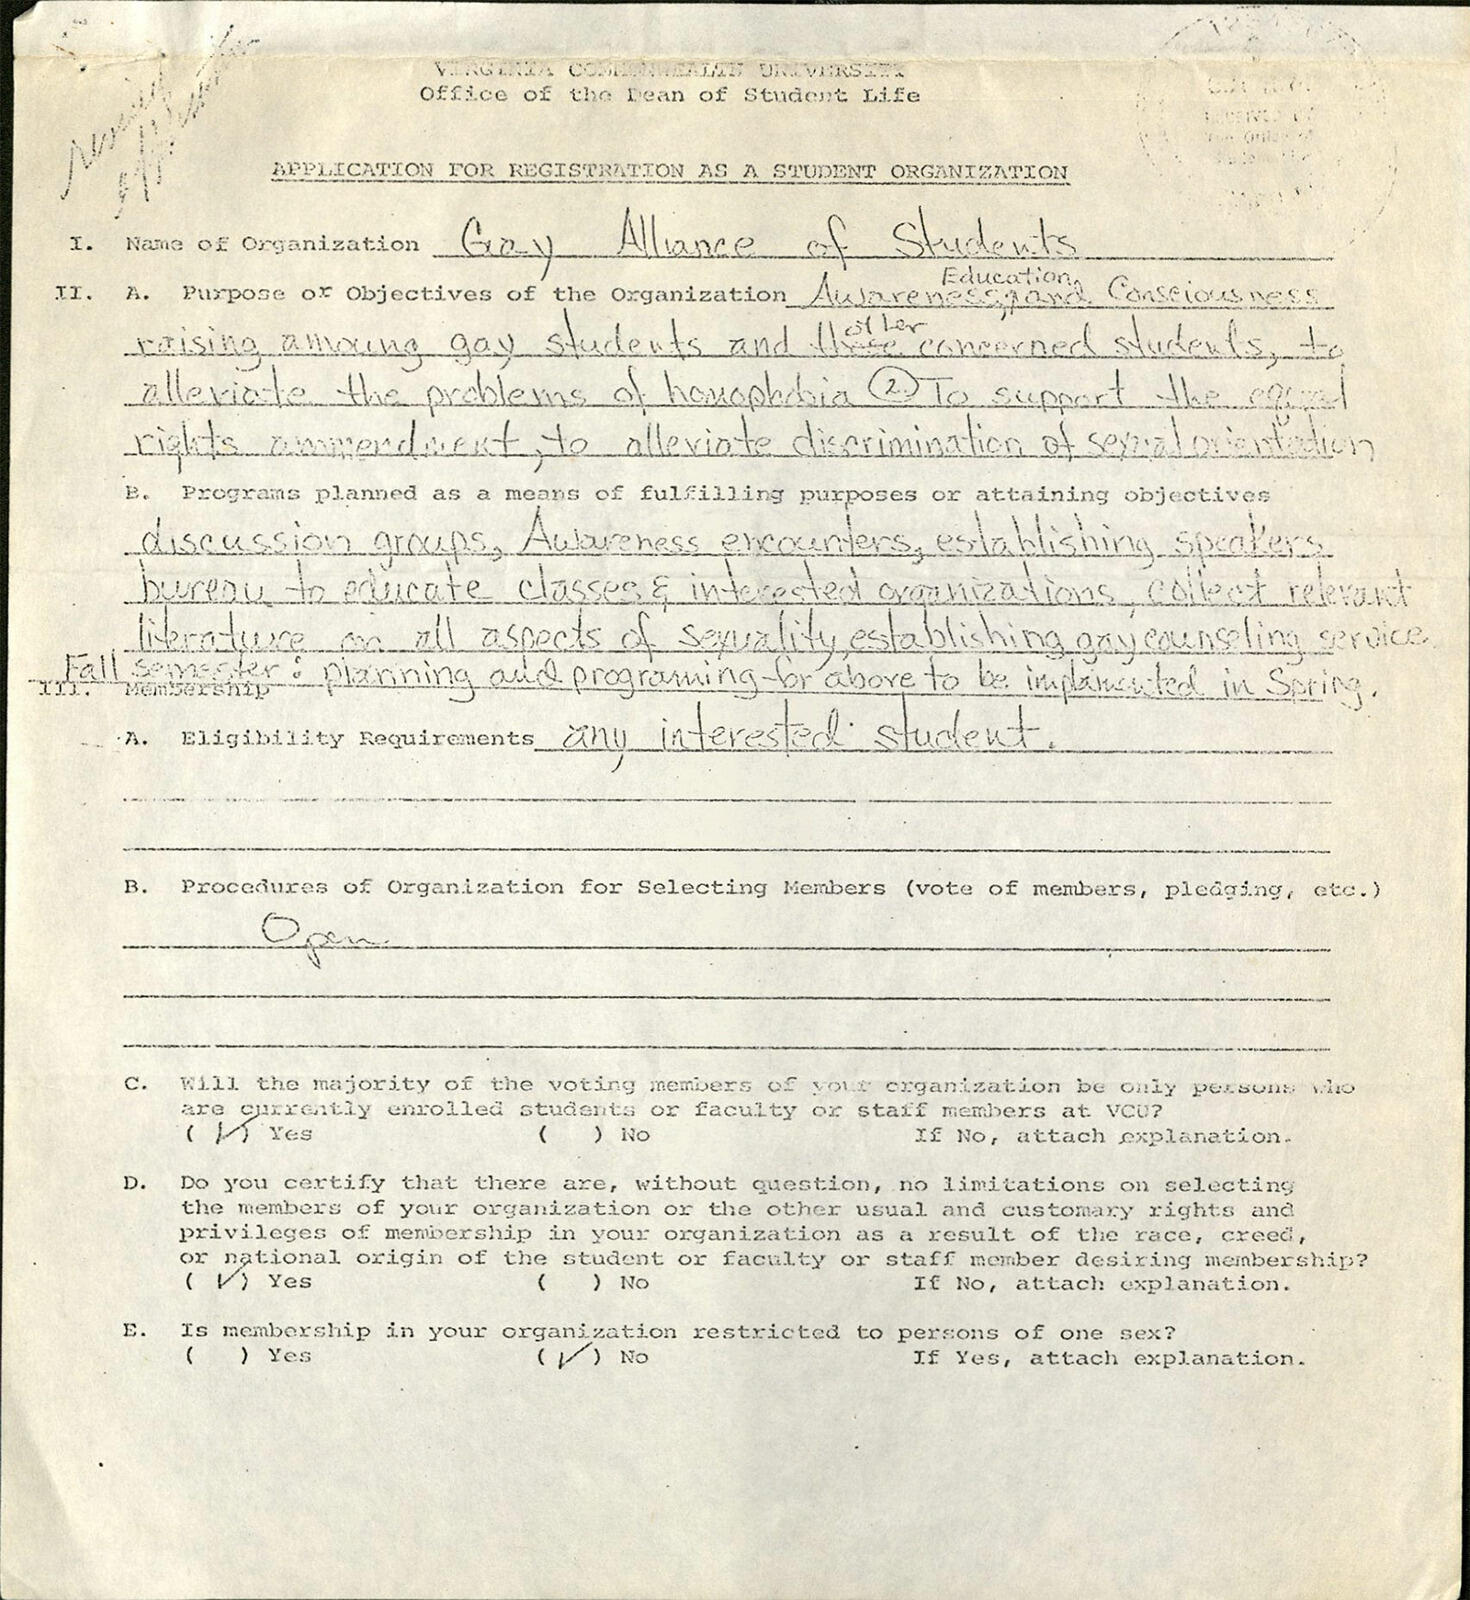 Gay Alliance of Students’ application to VCU to be recognized as an official student organization, signed by Brenda Kriegel, Oct. 2, 1974.
<br>Source: The VCU Gay Alliance of Students Collection, 1974-1976, a collection in Special Collections and Archives, James Branch Cabell Library
